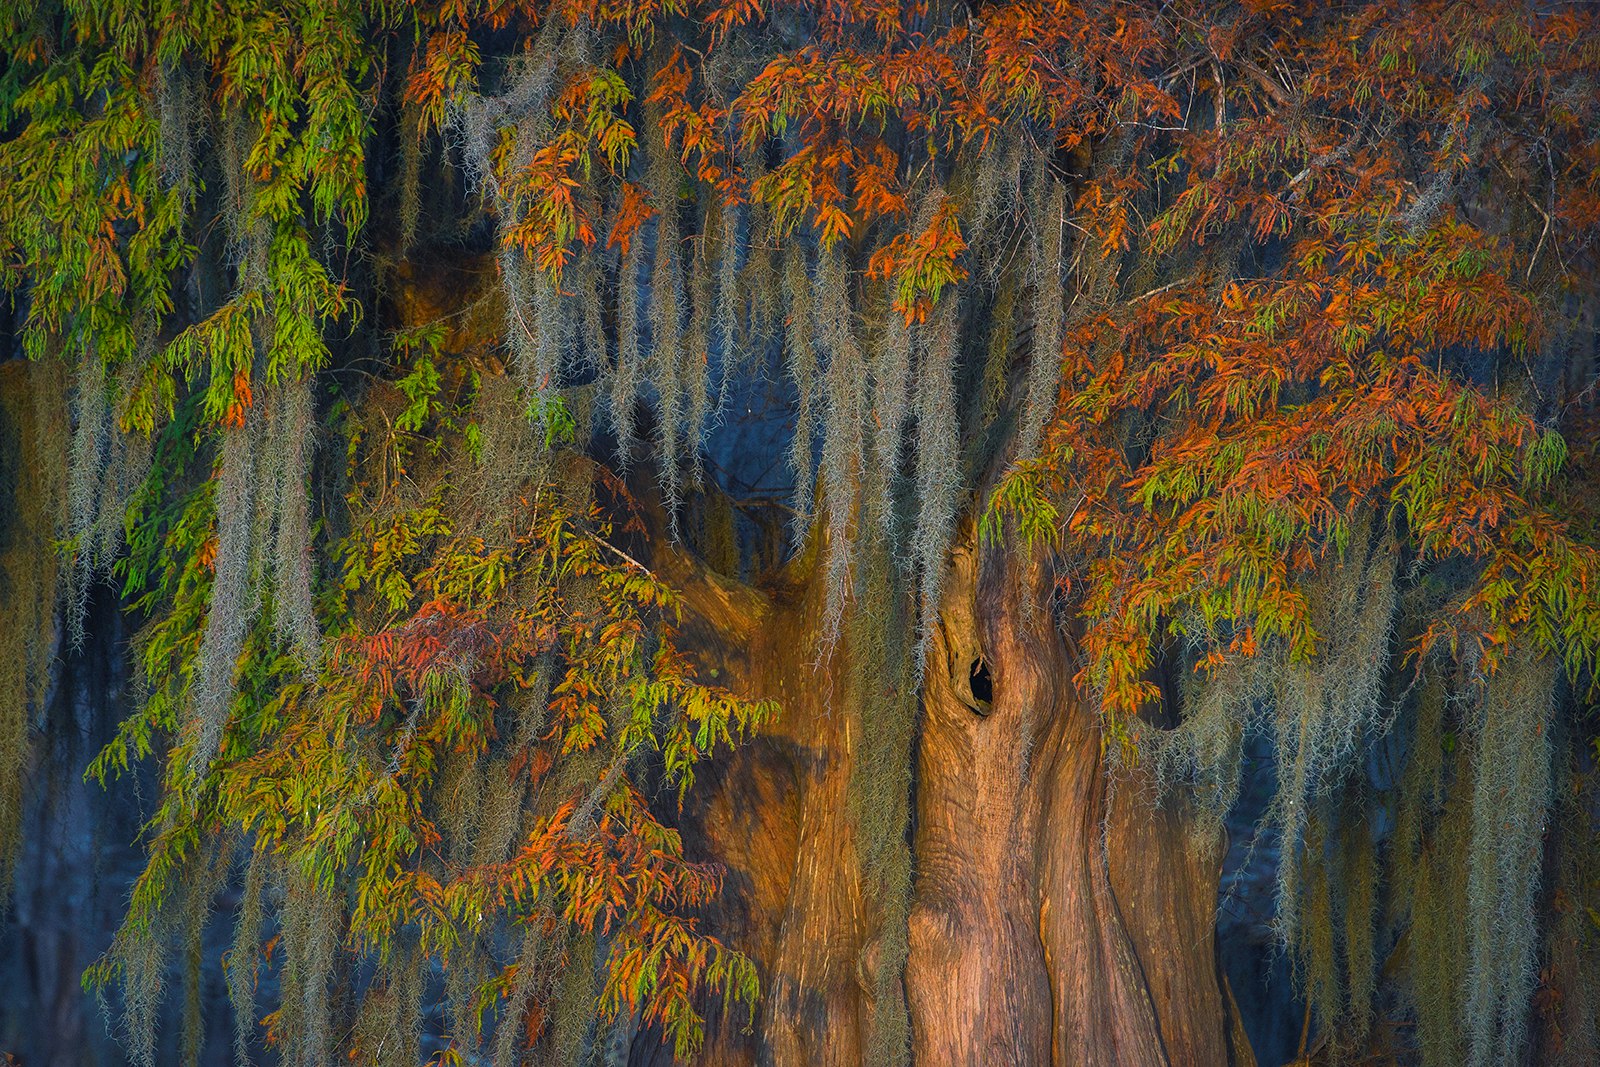 The last light of day illuminates the fall color on this mossy bald cypress in the Atchafalaya Basin. © Chris Moore / Getty Images